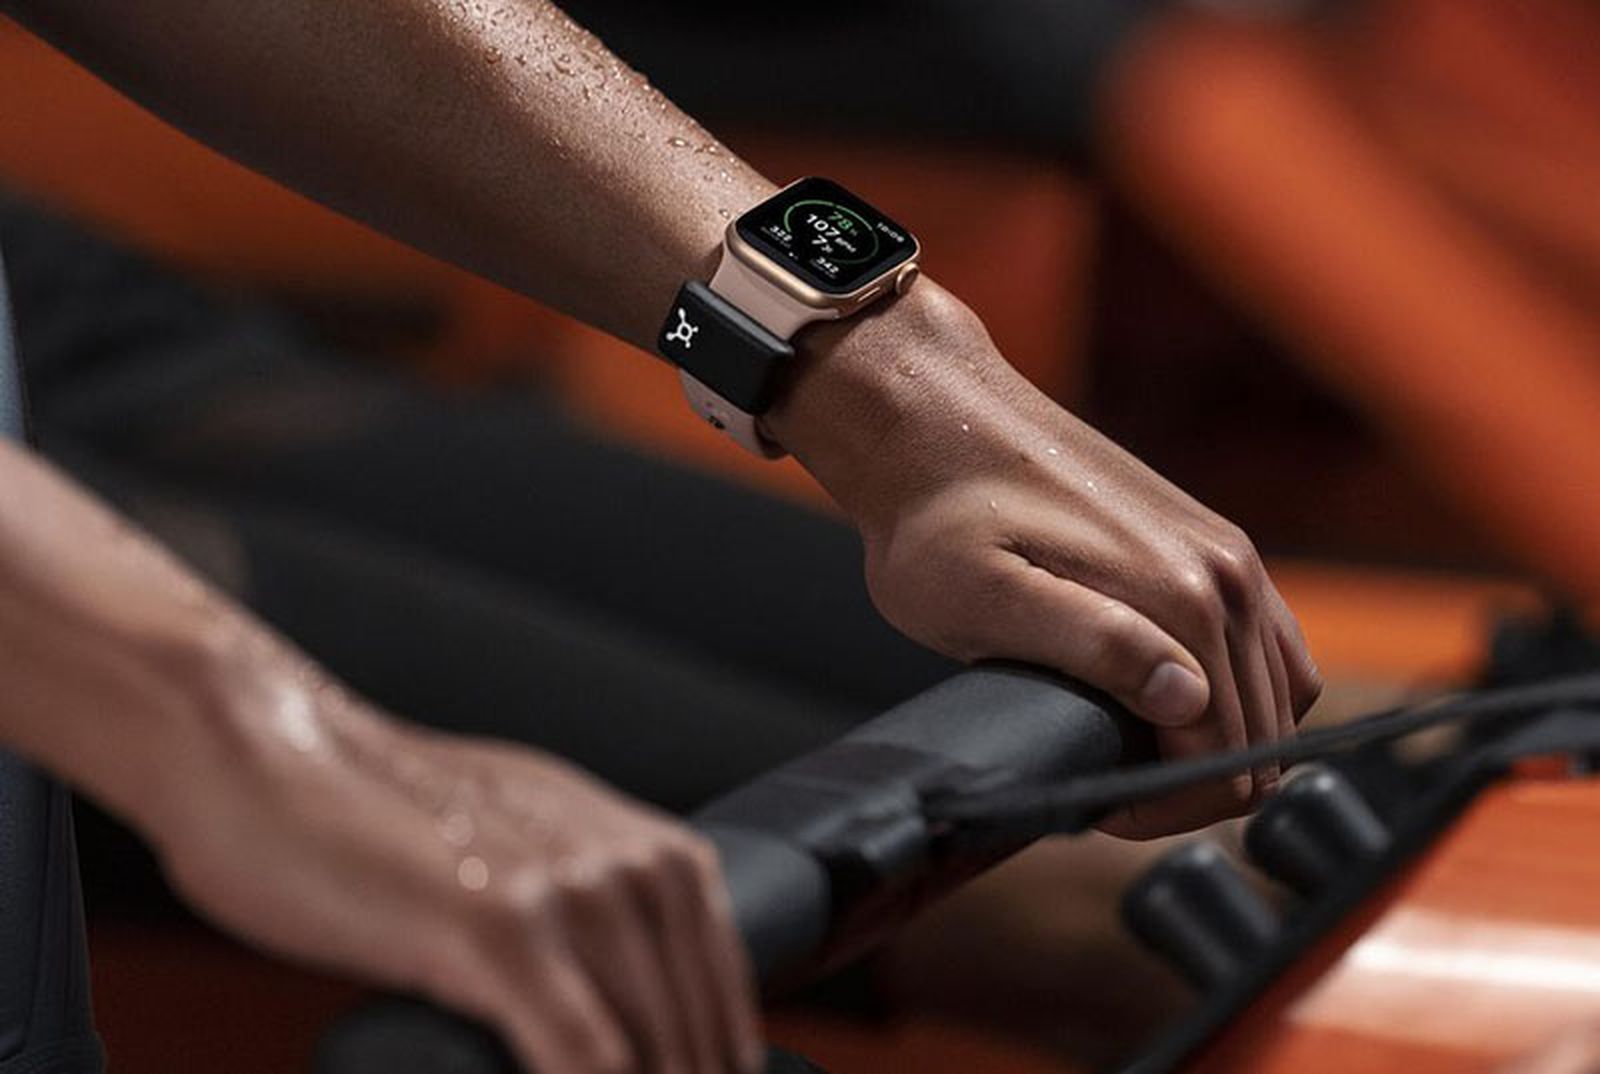 Apple Watch Connected' Program Will Offer Rewards for Working Out